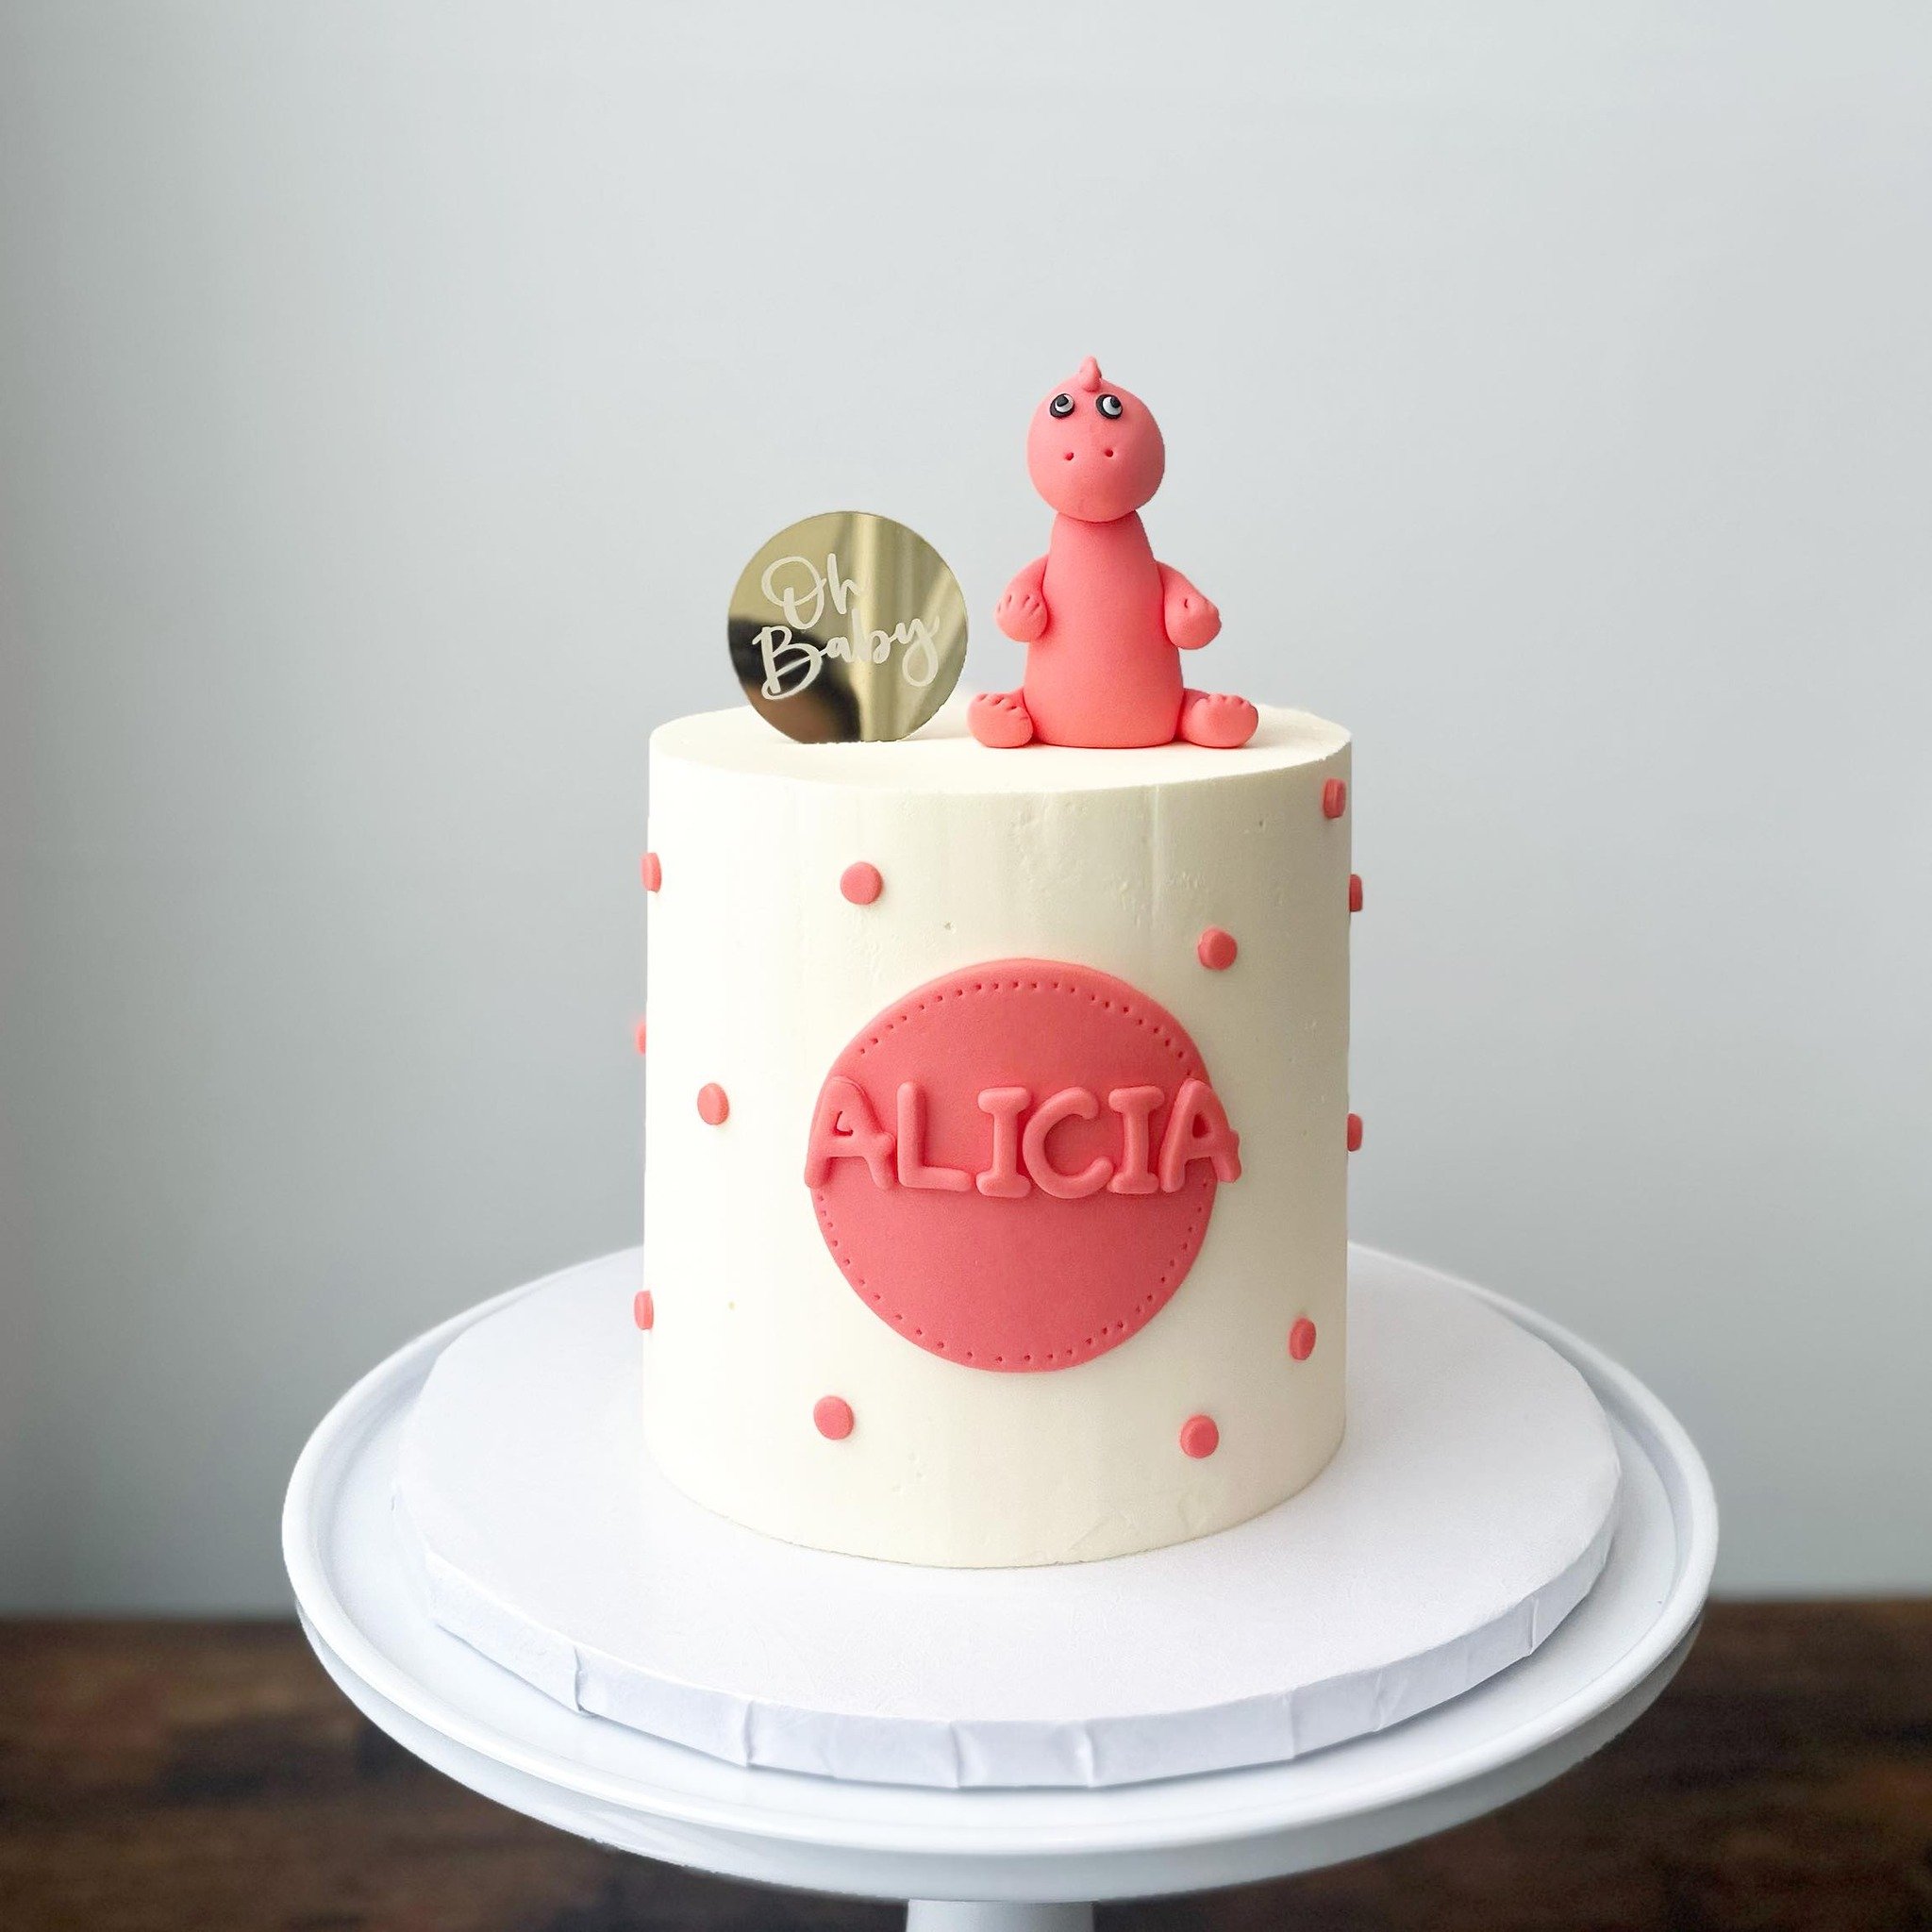 There was a dinosaur cake for Alicia&rsquo;s baby shower. 🥰🎈
.
.
.
Orders by Whatsapp, link in bio.